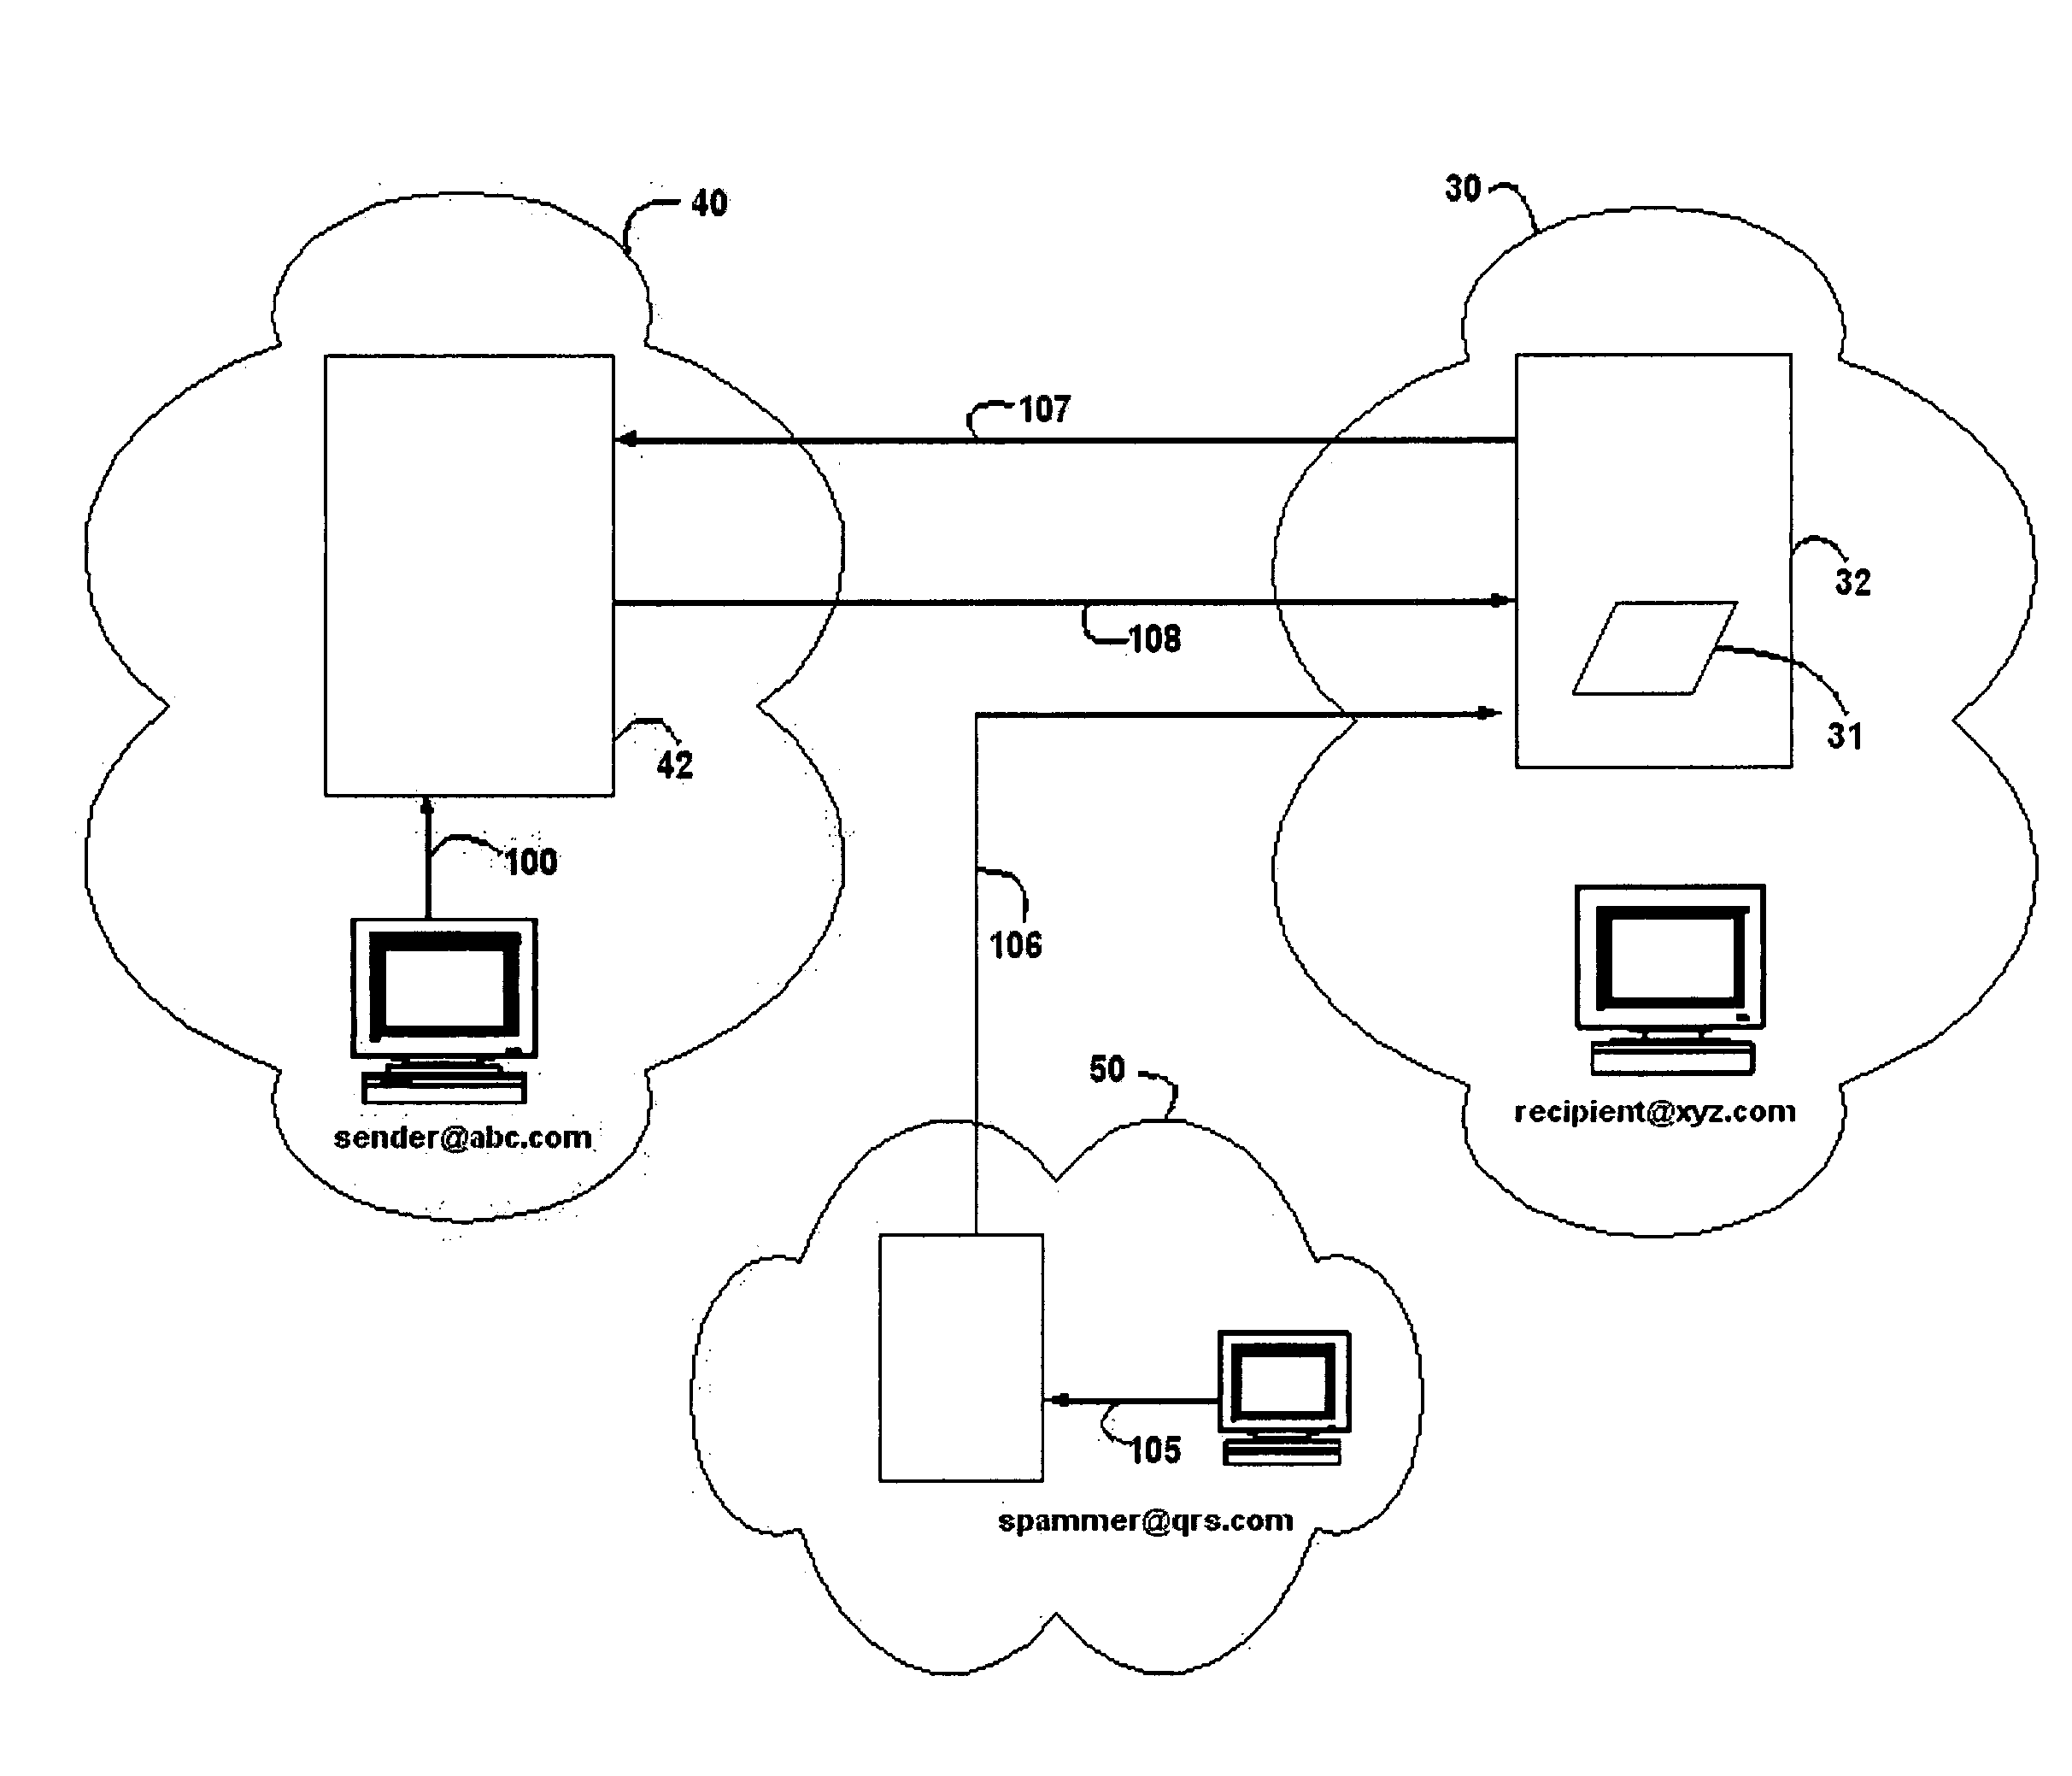 System and method for preventing delivery of unsolicited and undesired electronic messages by key generation and comparison